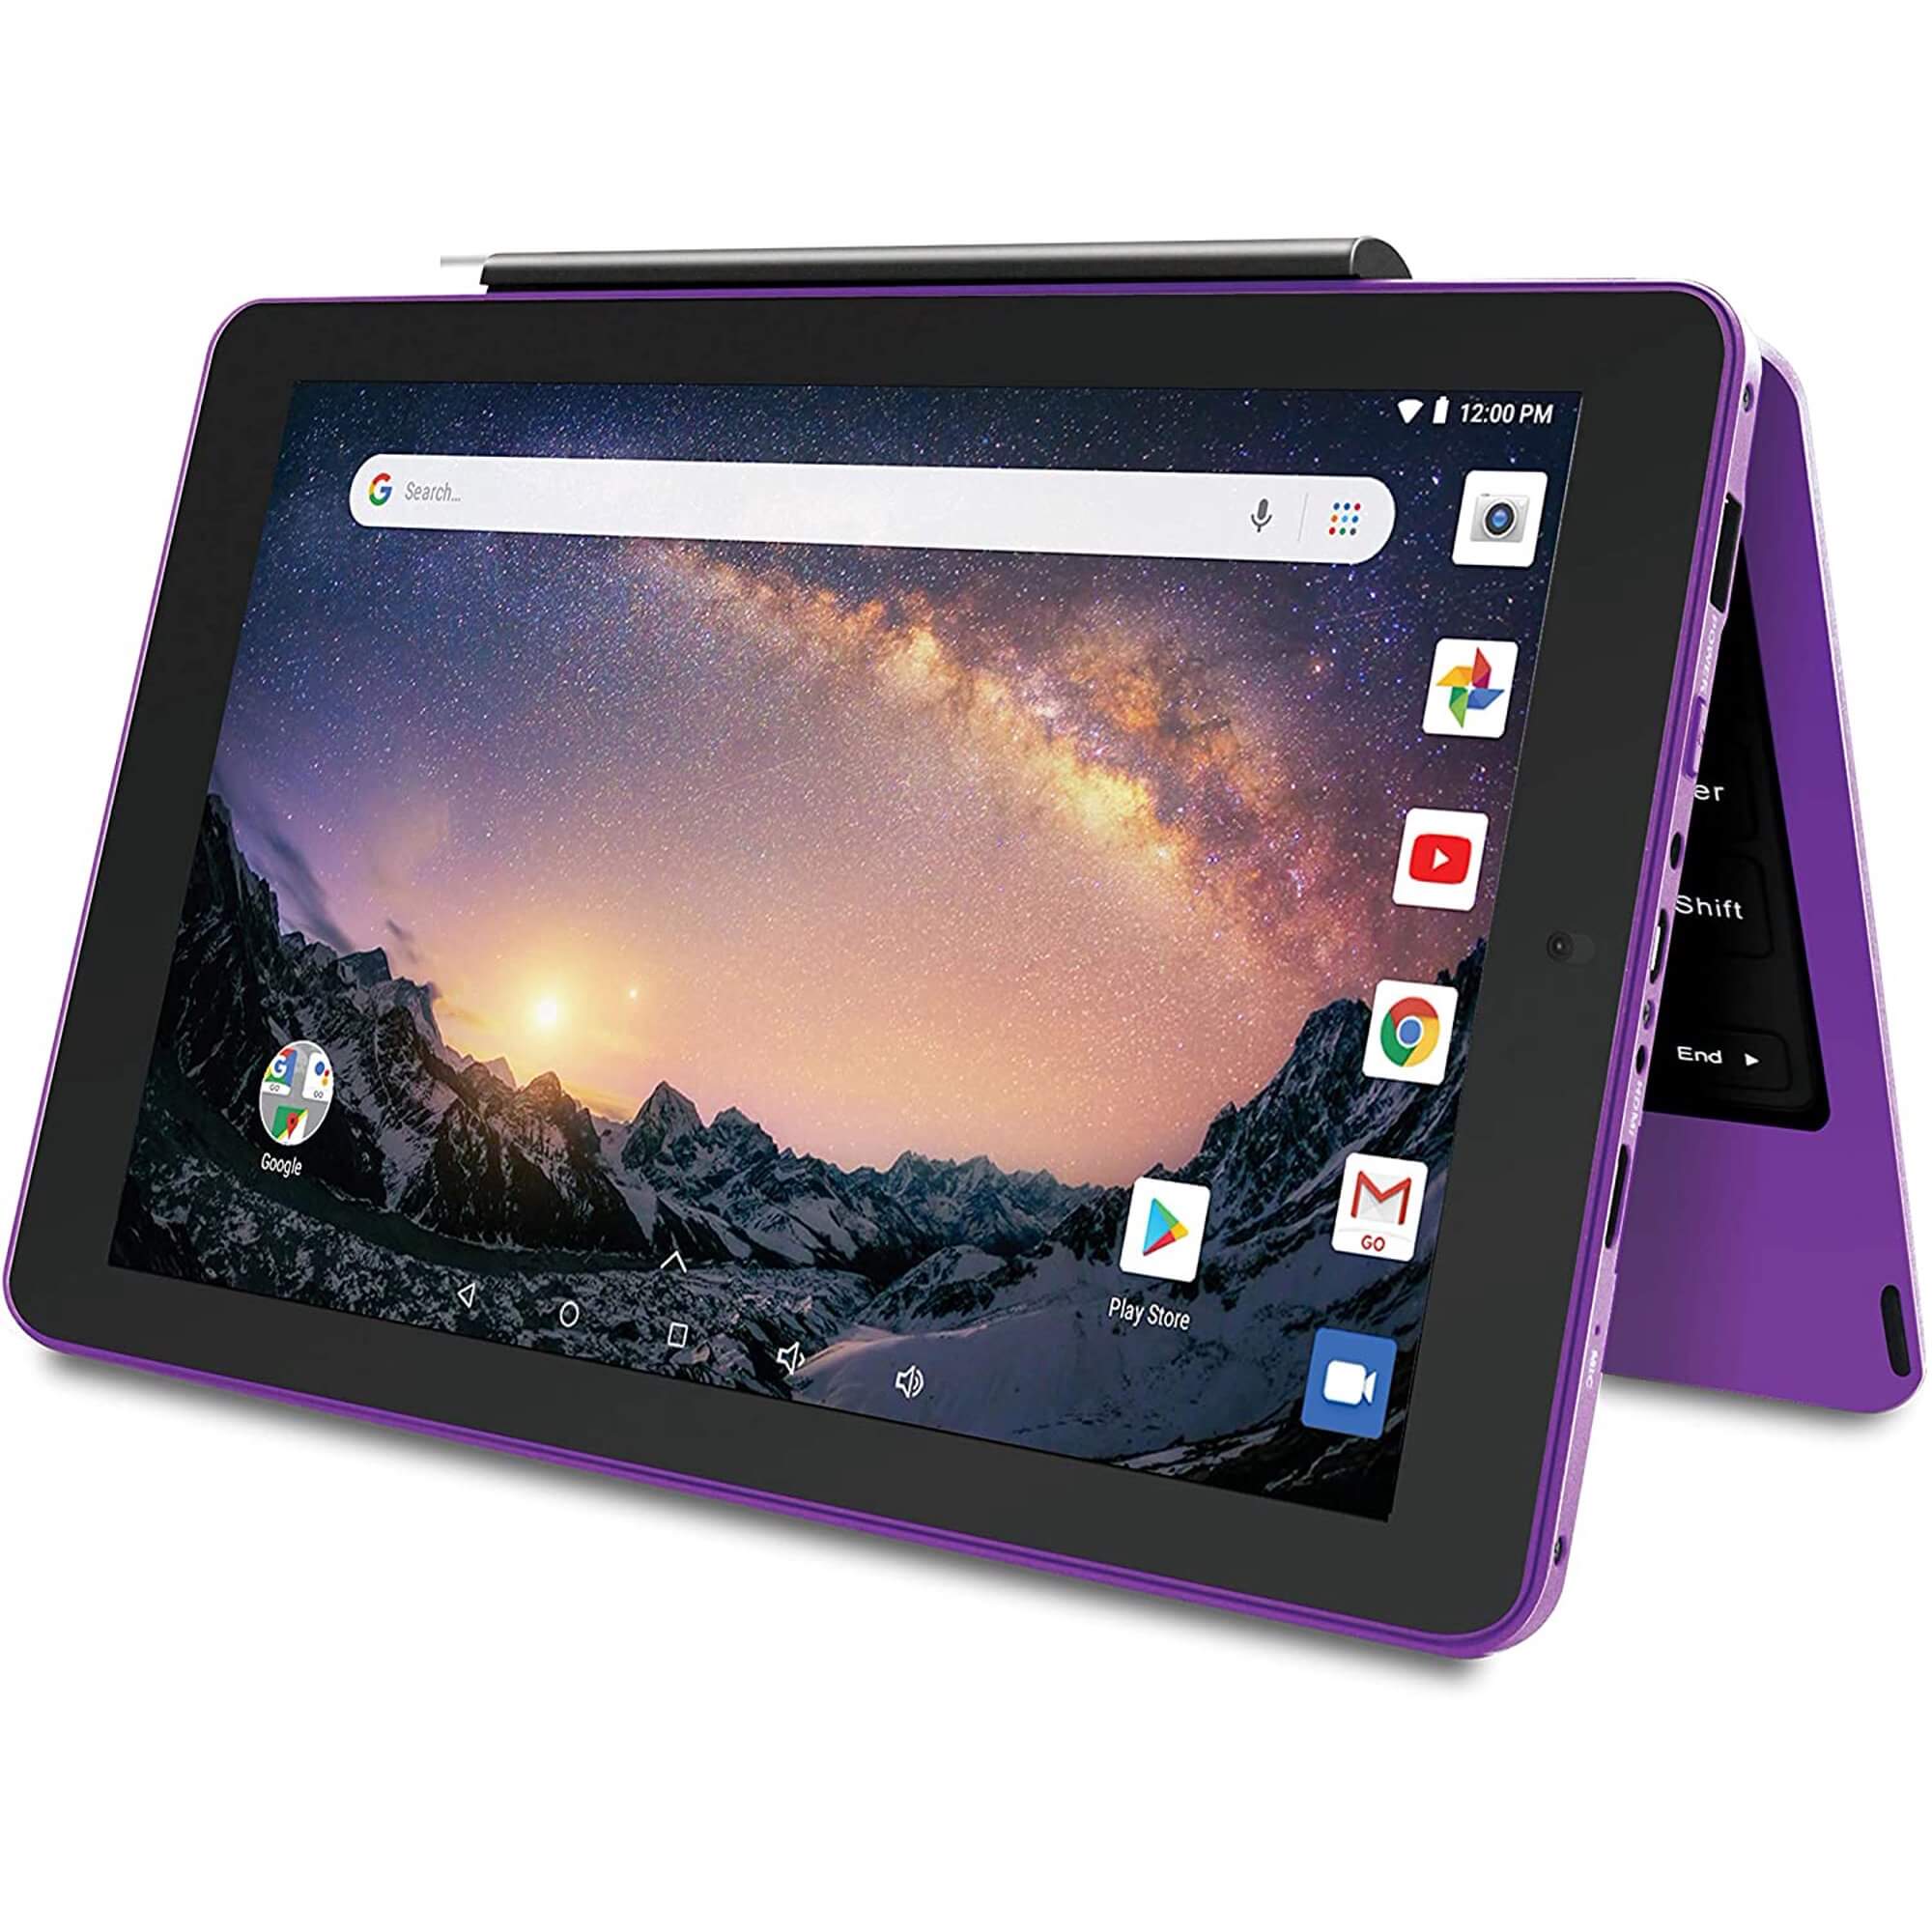 How To Factory Reset RCA Galileo Pro Tablet